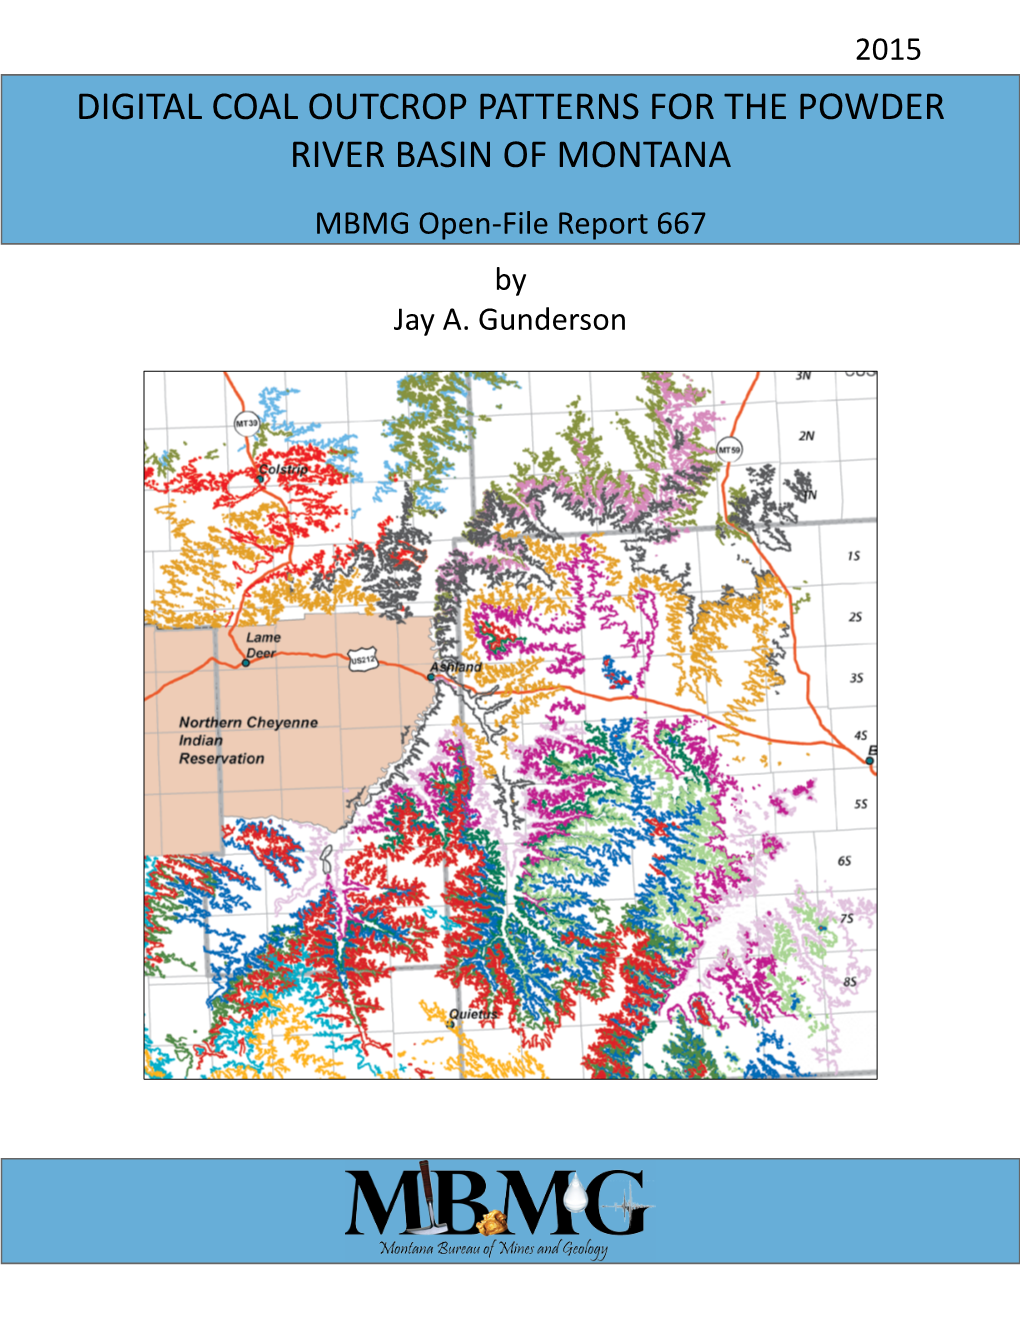 Digital Coal Outcrop Patterns for the Power River Basin of Montan